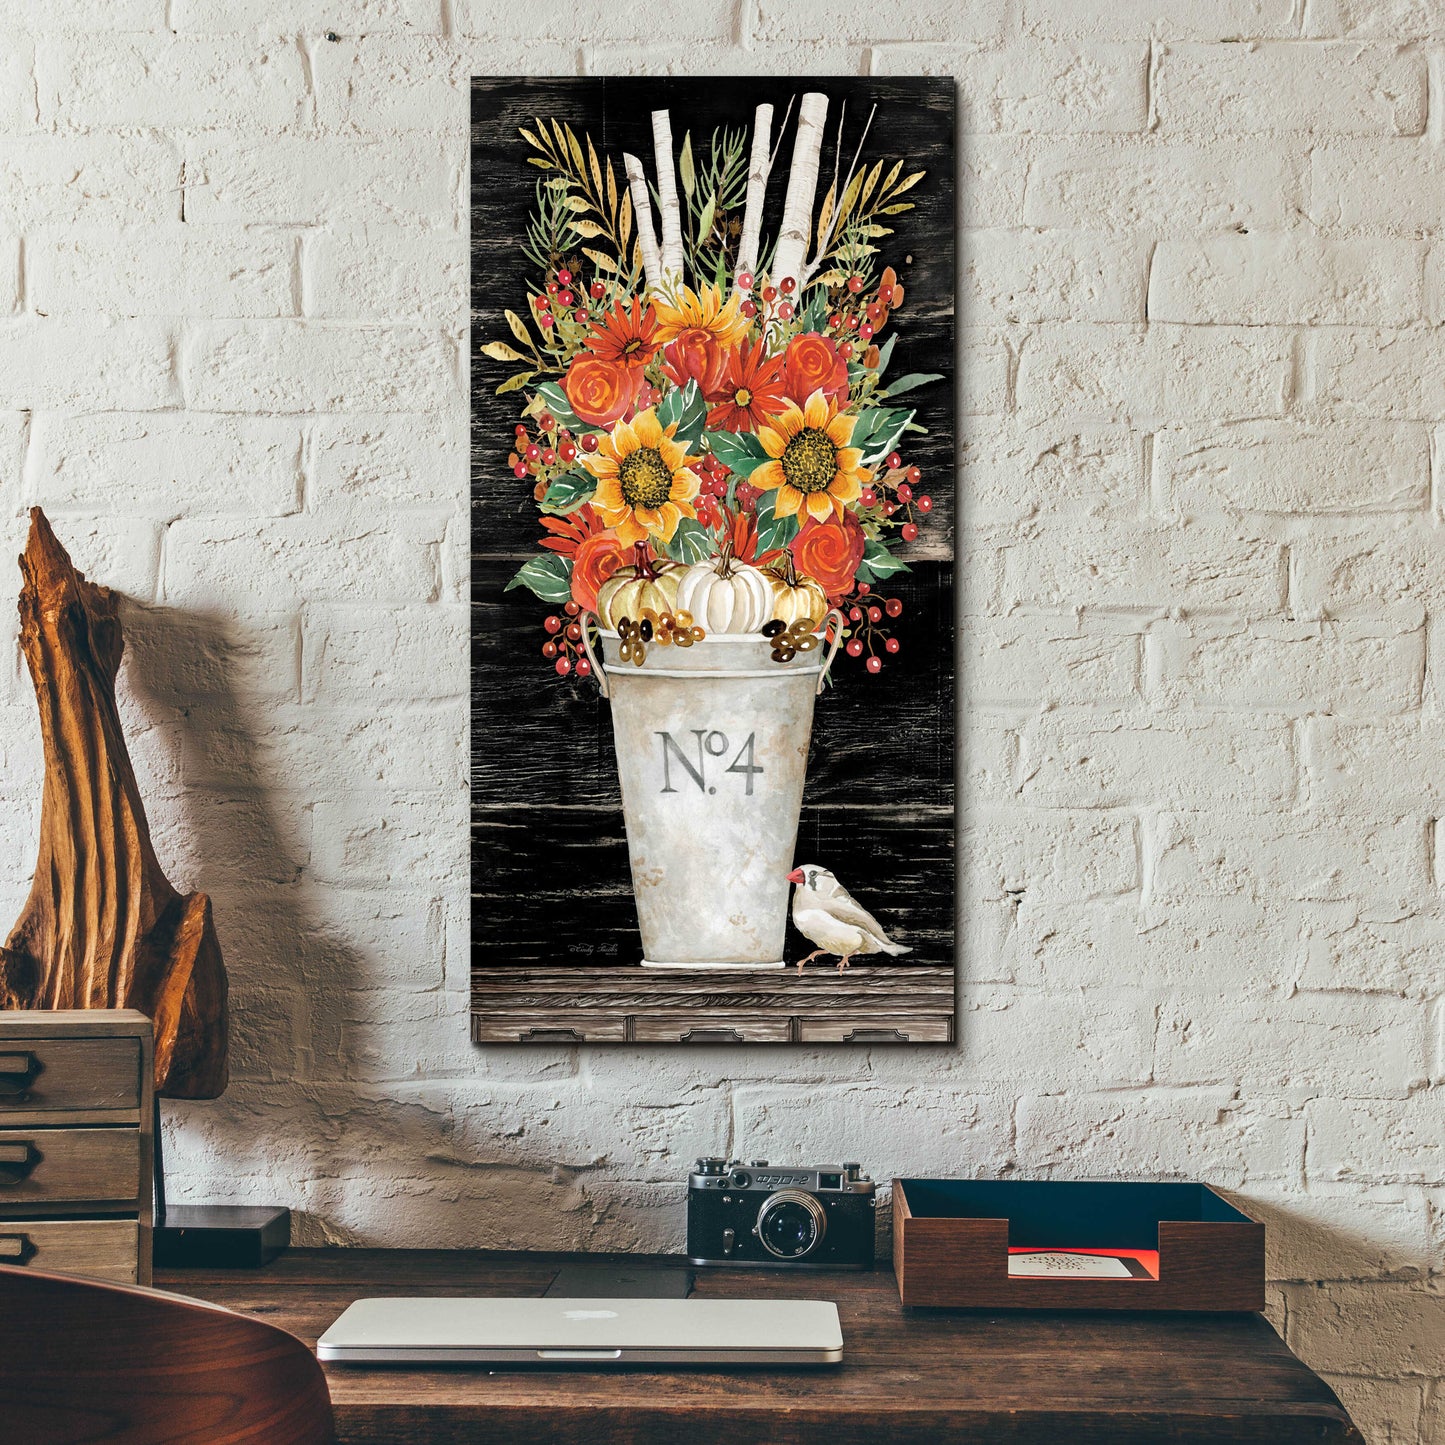 Epic Art 'No. 4 Fall Flowers and Birch 2' by Cindy Jacobs, Acrylic Glass Wall Art,12x24